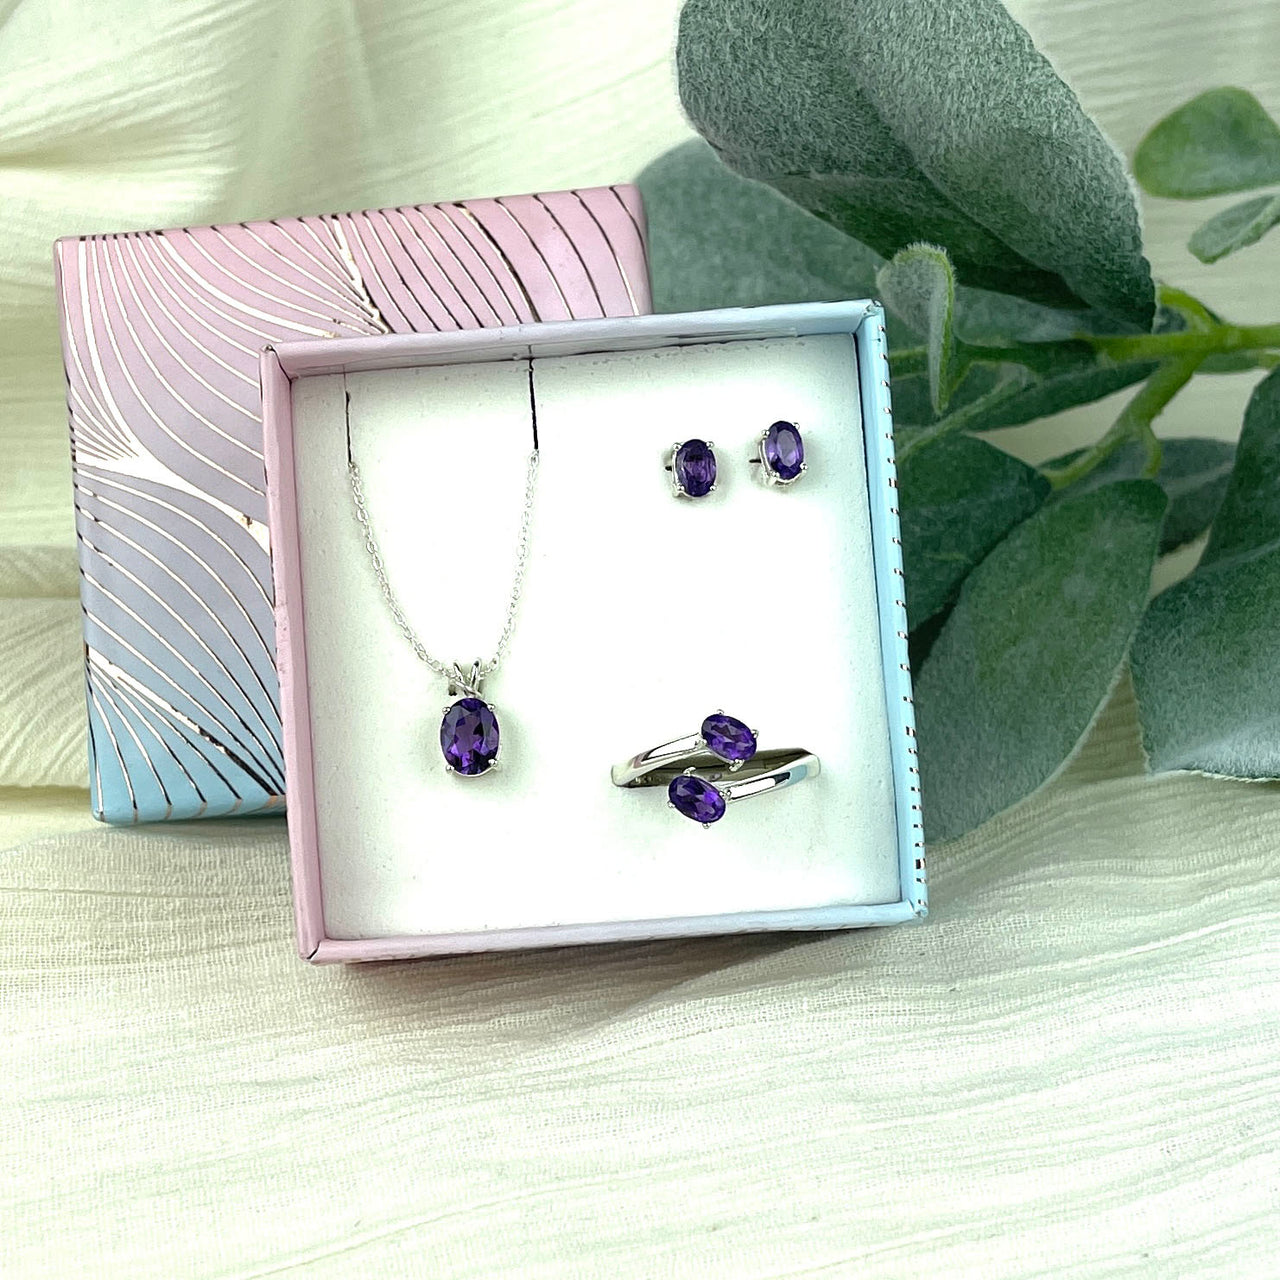 Amethyst Faceted Jewelry 3 pc Box Set Sterling Silver Earrings, Pendant, Adjustable Ring #LV3201